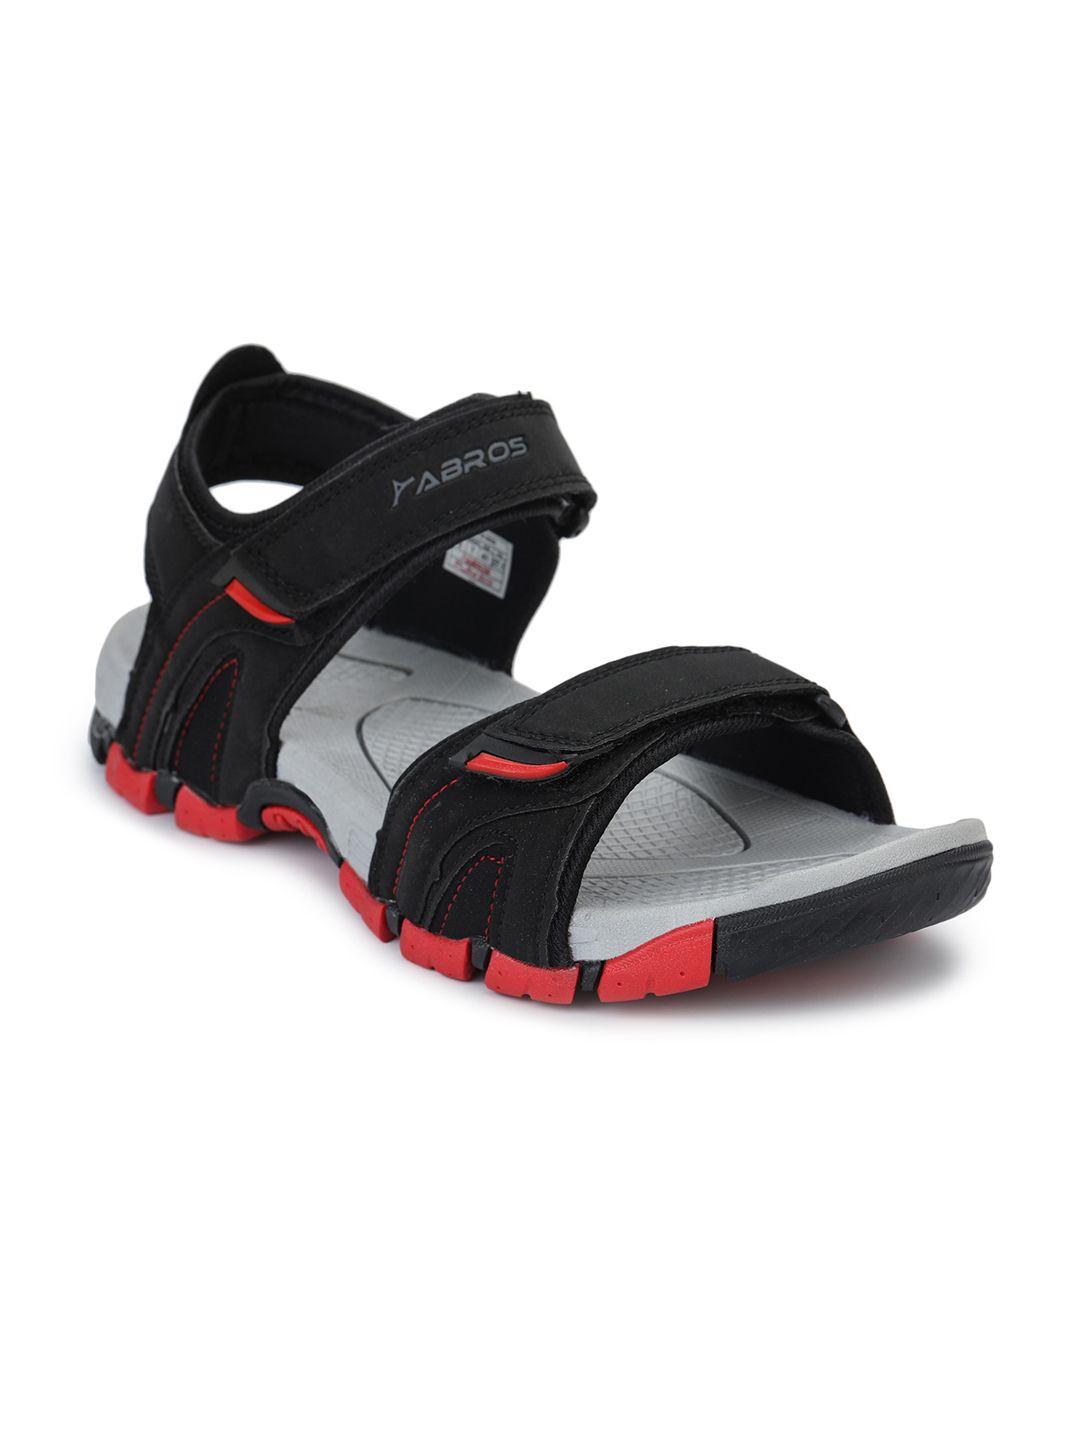 ABROS Men Black & Red Solid Sports Sandals